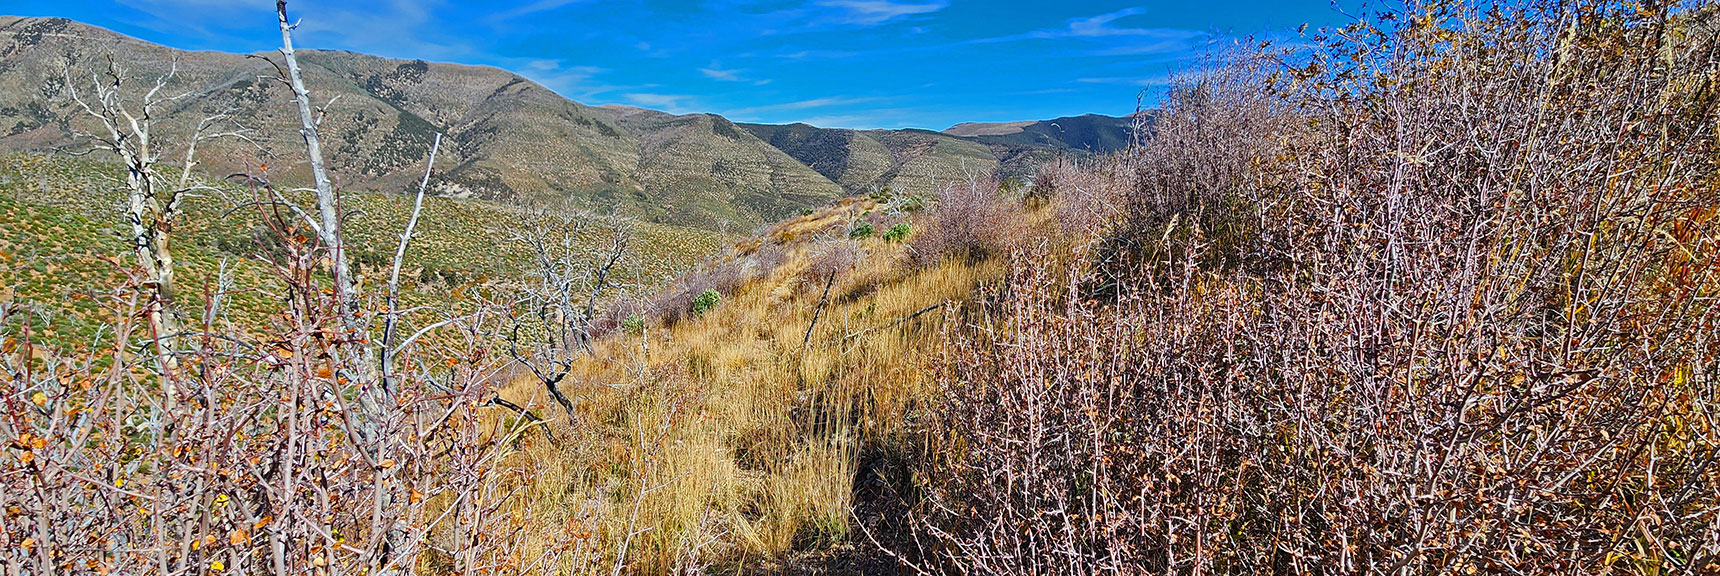 Trail Lost in Grass As it Descends Upper East Side of Ridge. Trust the Trail is There. | Griffith Shadow Loop | Lovell Canyon, Nevada